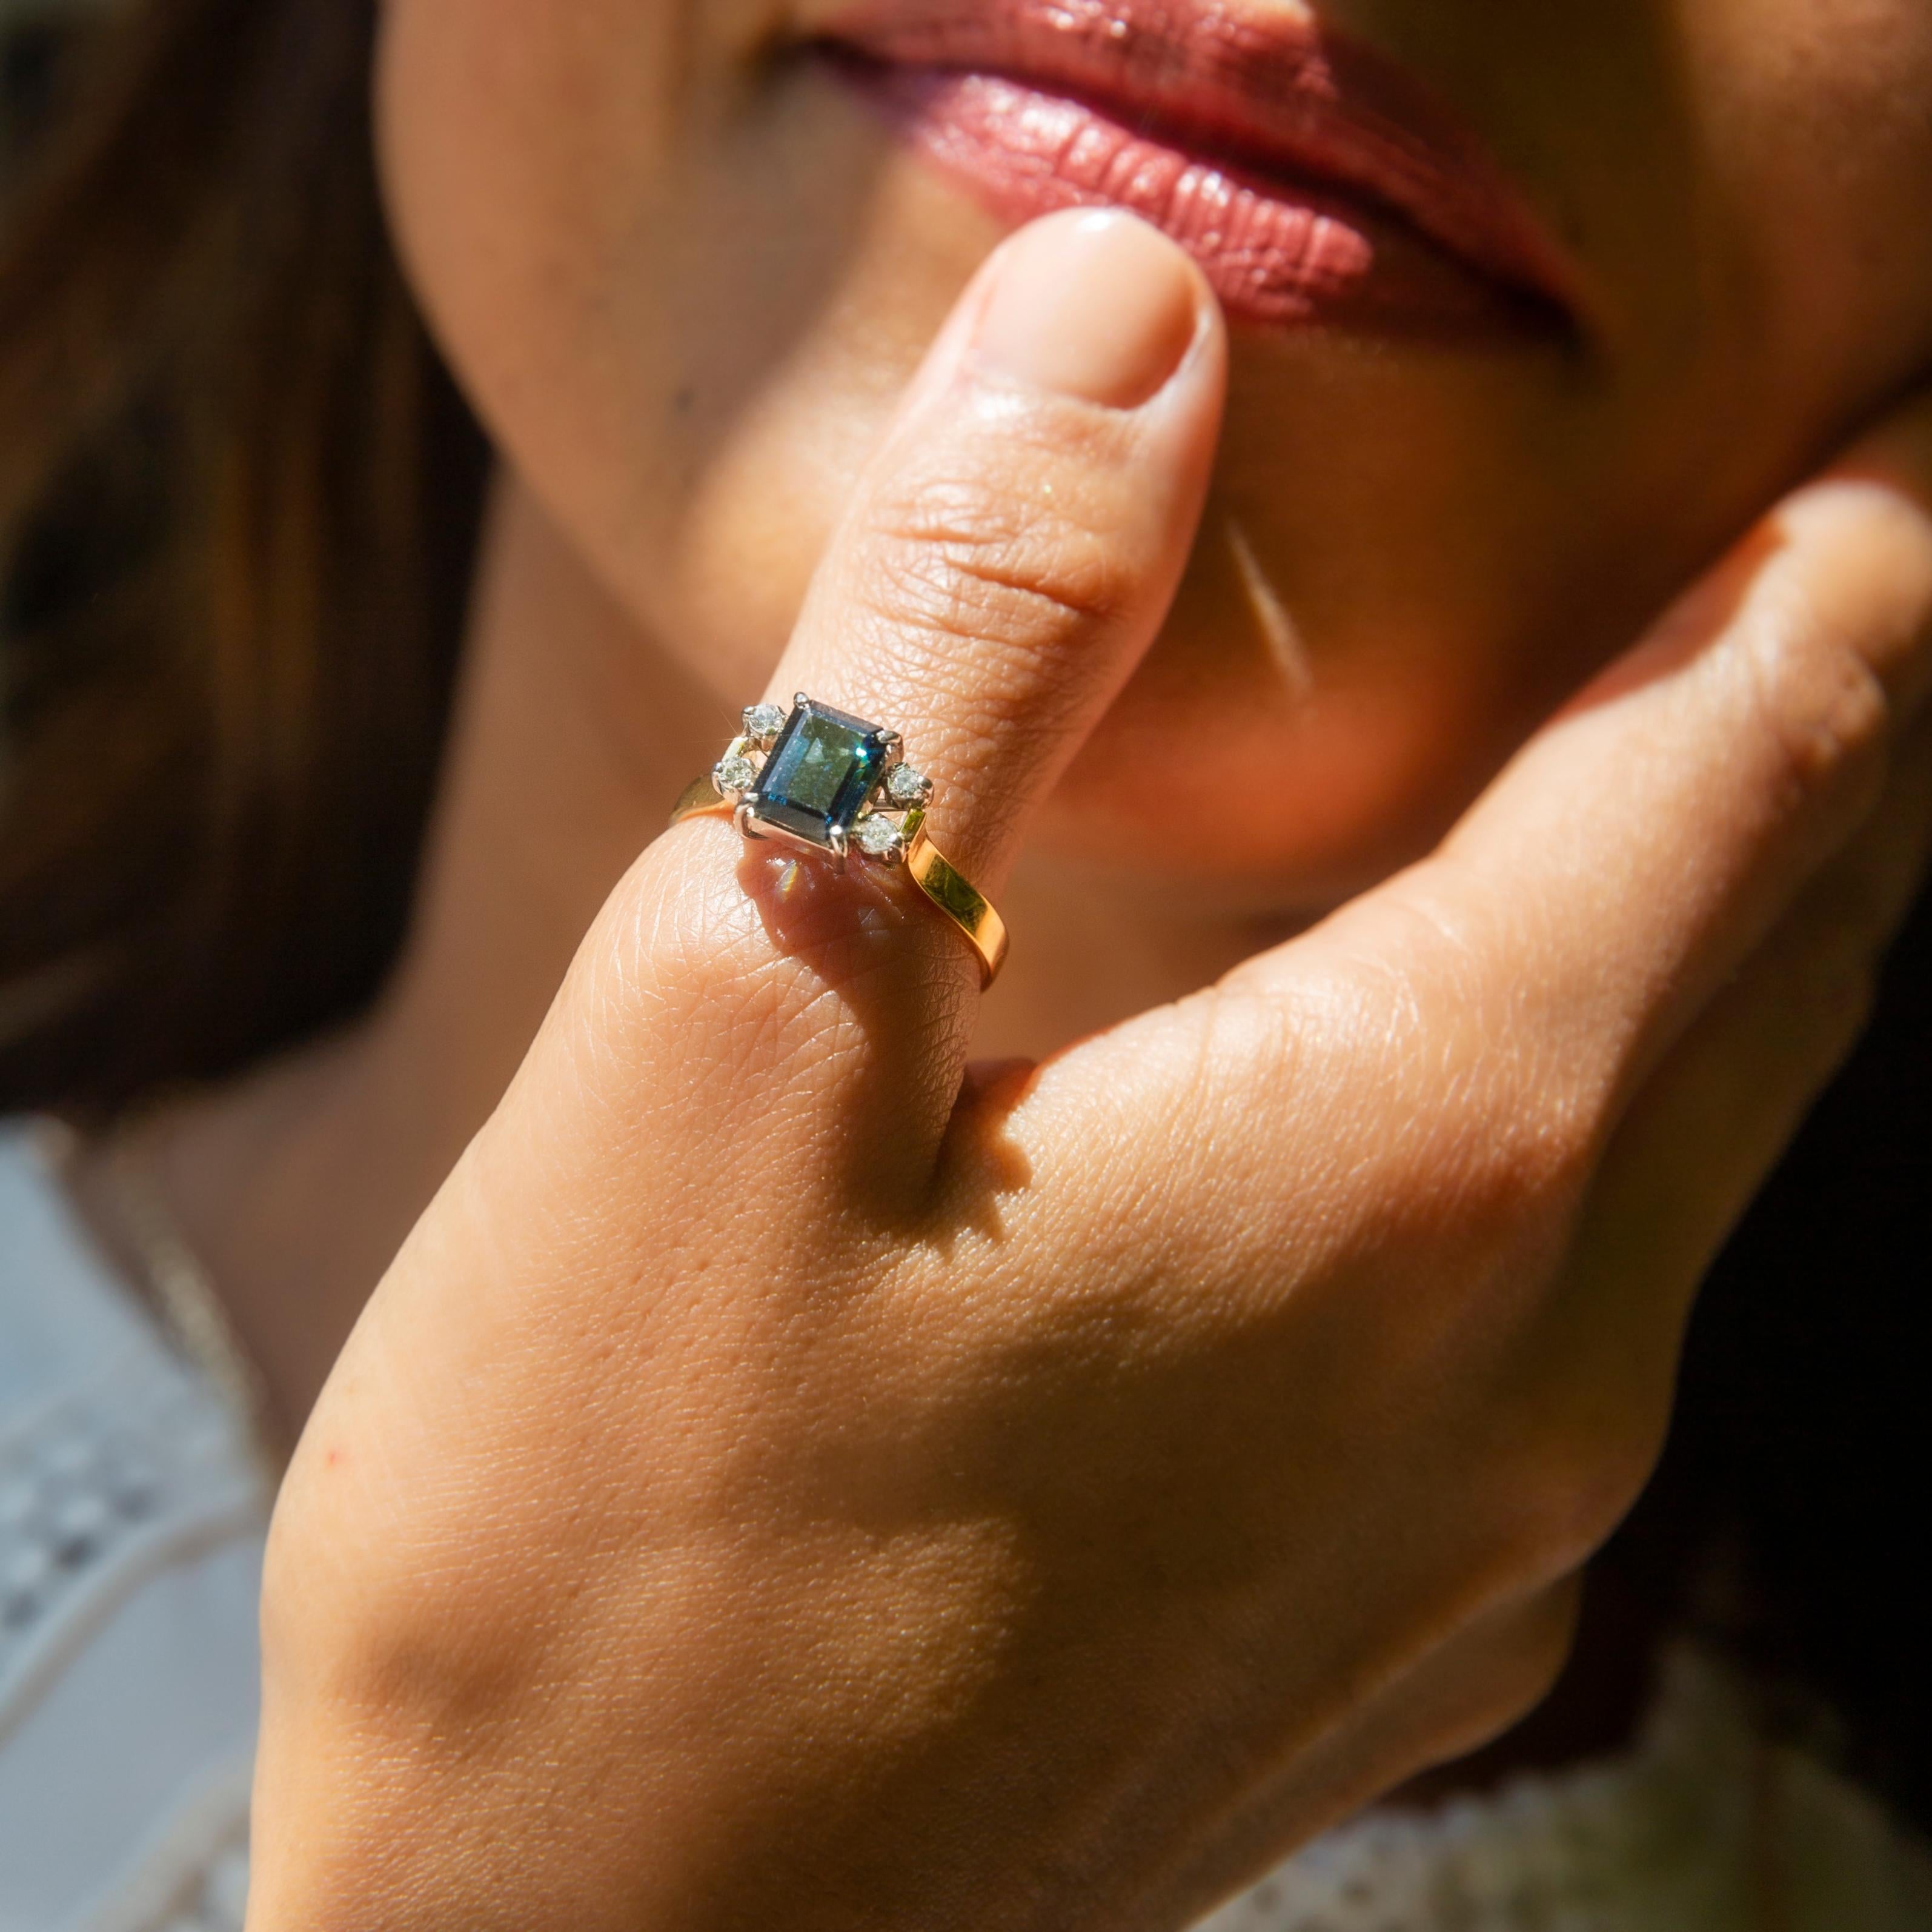 Under the veil of night we lay,
Destinies intertwined,
Stars shine forth to guide the way,
Our fates forever aligned.

Calypso is set with an emerald cut teal & deep blue sapphire with a quartet of brilliant cut diamonds. 

The Calypso Ring Gem